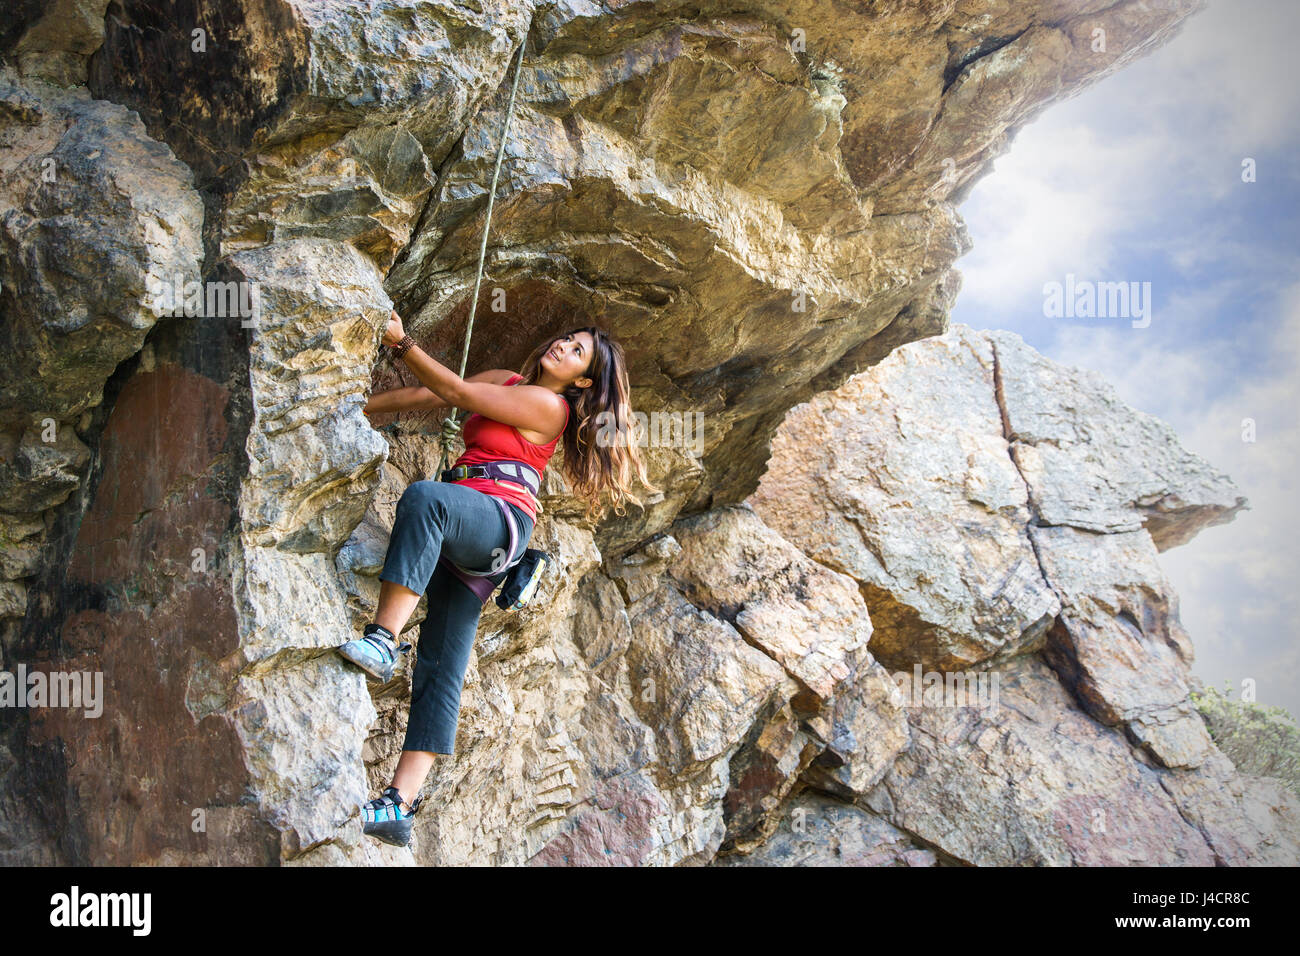 Thirty-year-old female top ropes boulder problem in Glen Park Canyon, San Francisco. Stock Photo